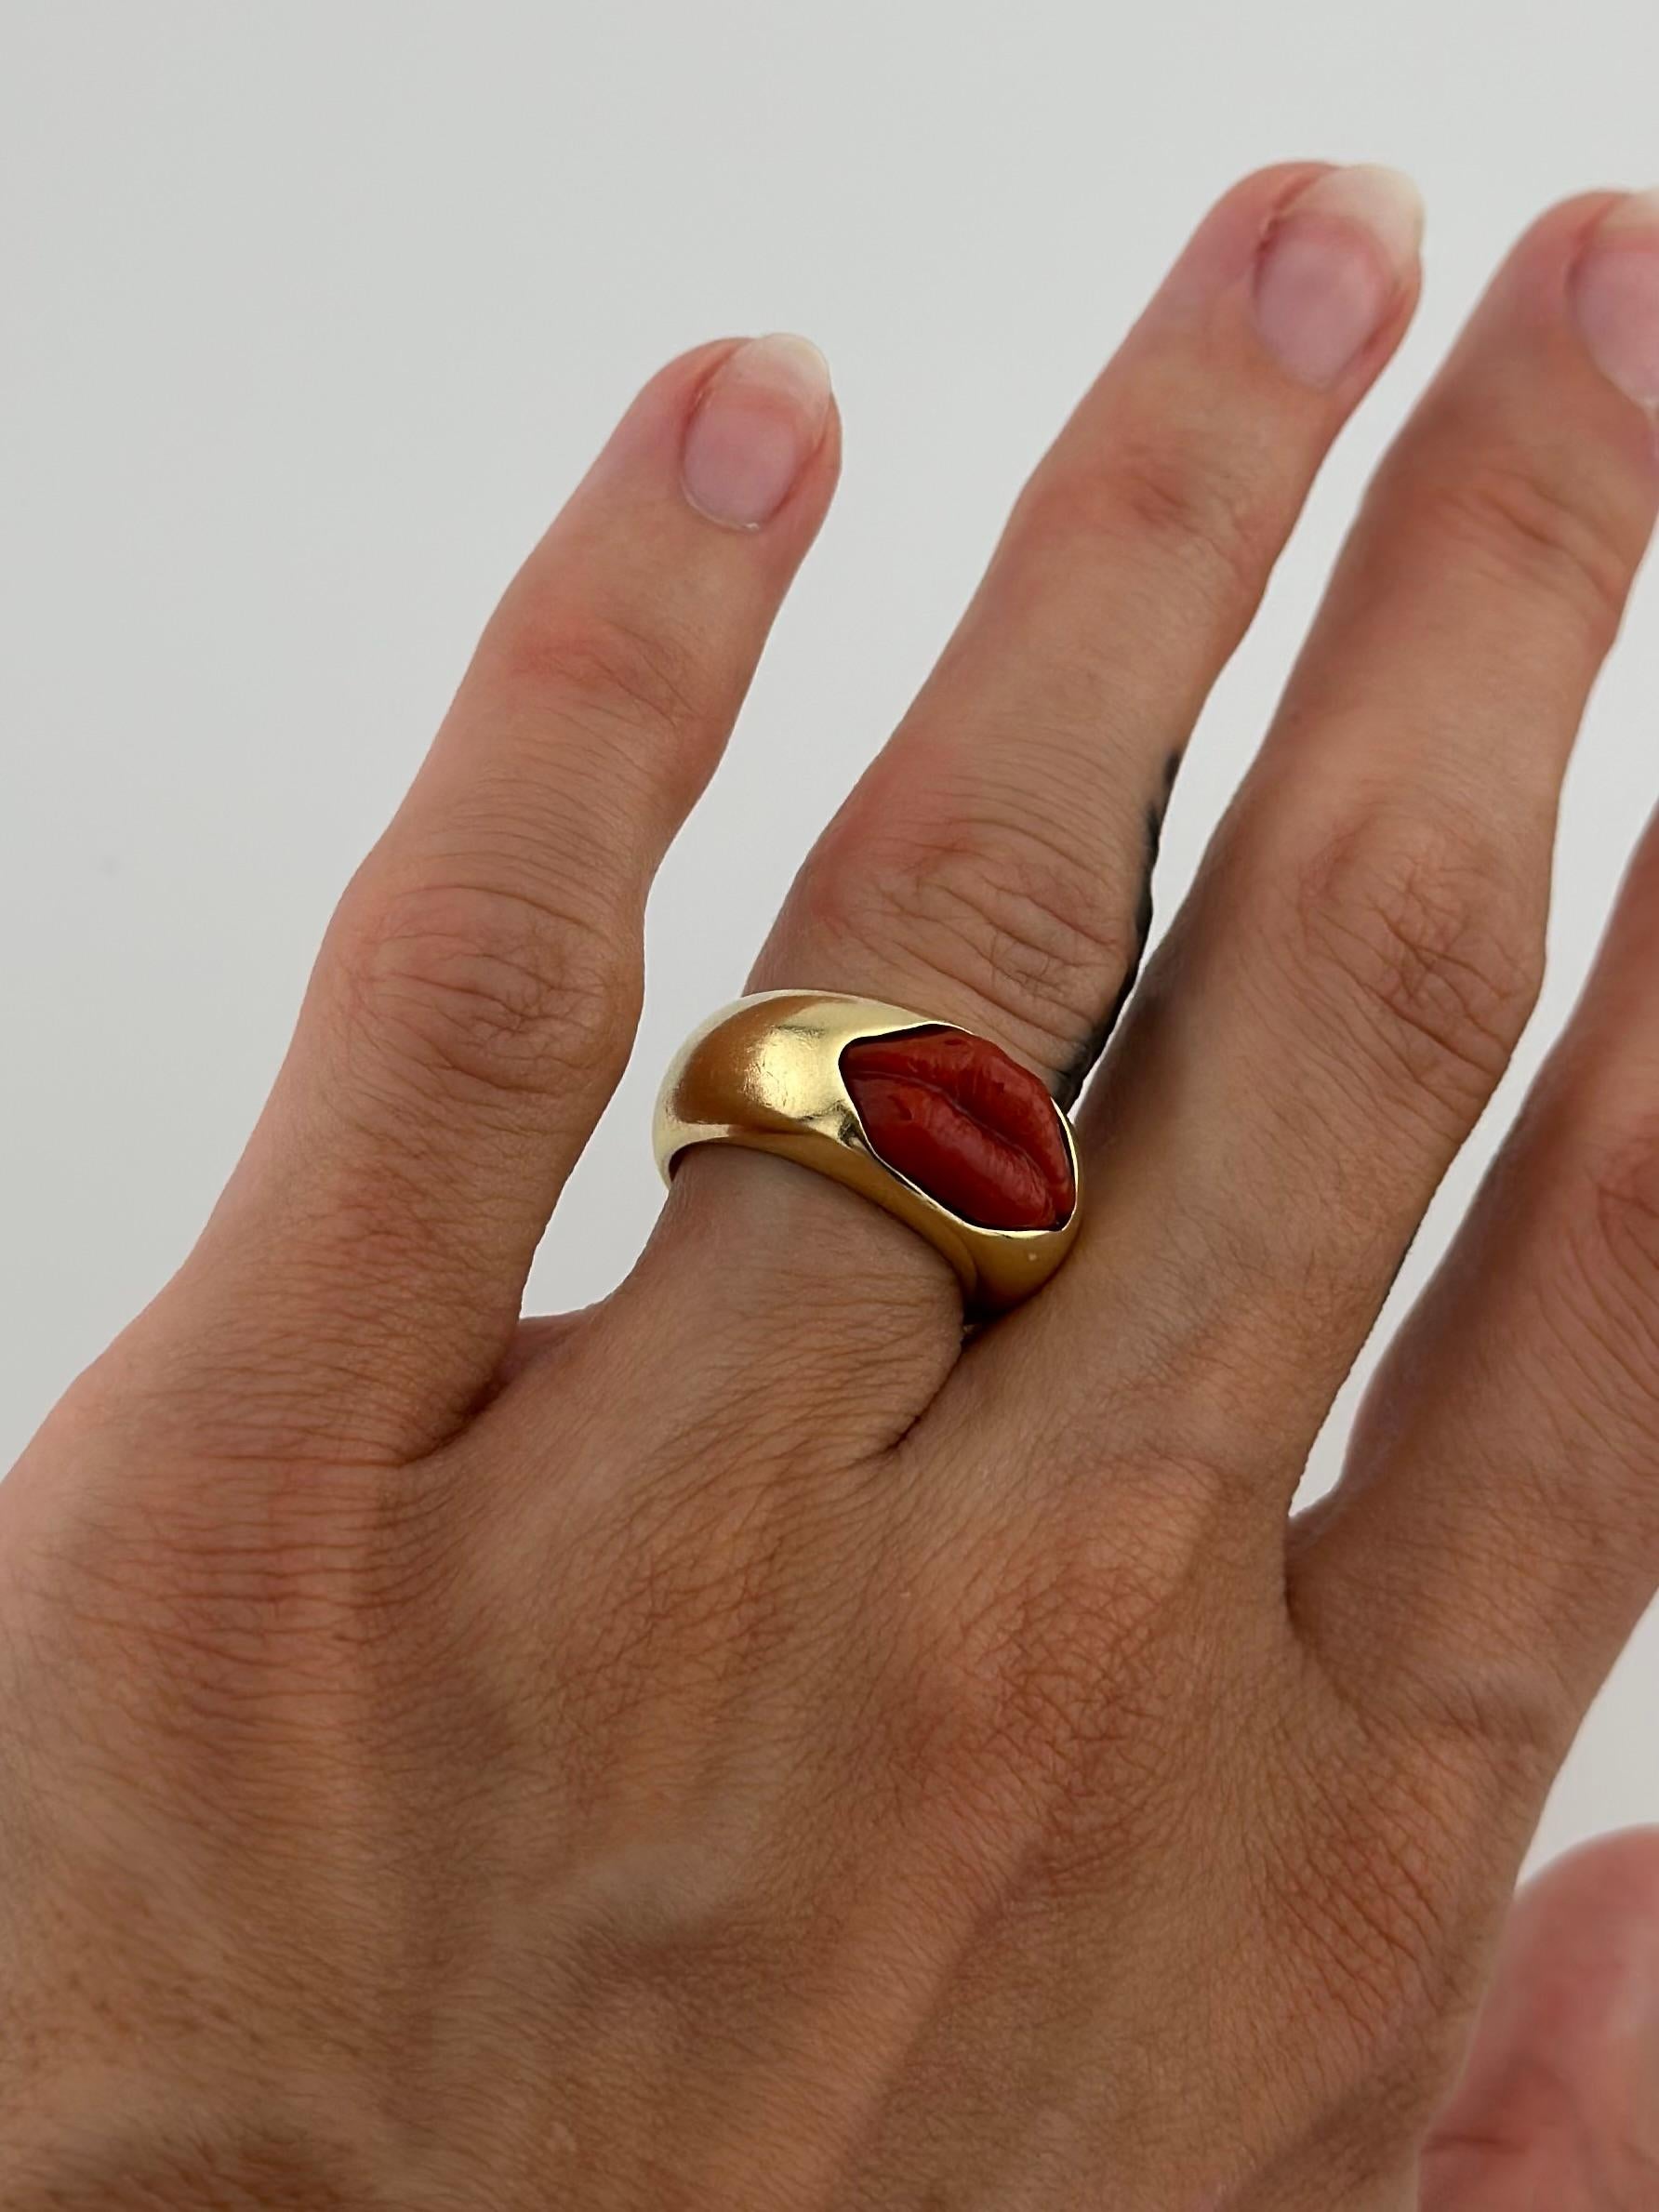 Rare hand carved, natural blood coral lips, crafted and sourced in Naples, Italy. Set in a 18k yellow gold dome ring, handmade in Los Angeles by designer Grunfeld. Size 5 US, but can be sized if needed free of charge. The total weight is 14 grams.